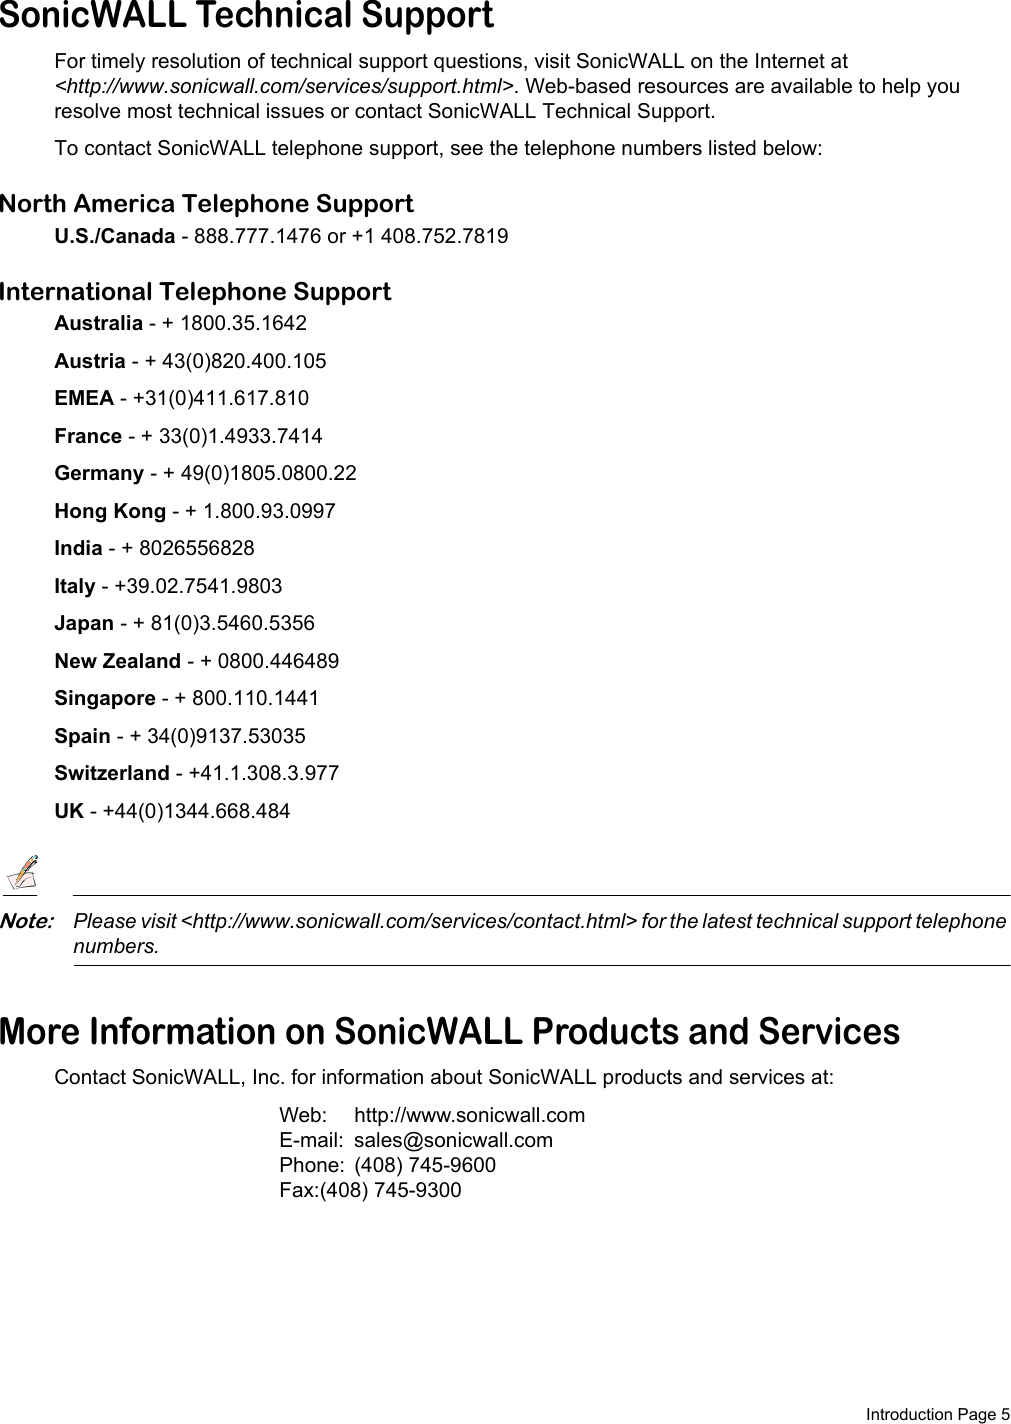  Introduction Page 5SonicWALL Technical SupportFor timely resolution of technical support questions, visit SonicWALL on the Internet at &lt;http://www.sonicwall.com/services/support.html&gt;. Web-based resources are available to help you resolve most technical issues or contact SonicWALL Technical Support.To contact SonicWALL telephone support, see the telephone numbers listed below:North America Telephone SupportU.S./Canada - 888.777.1476 or +1 408.752.7819International Telephone SupportAustralia - + 1800.35.1642Austria - + 43(0)820.400.105EMEA - +31(0)411.617.810France - + 33(0)1.4933.7414Germany - + 49(0)1805.0800.22Hong Kong - + 1.800.93.0997India - + 8026556828Italy - +39.02.7541.9803Japan - + 81(0)3.5460.5356New Zealand - + 0800.446489Singapore - + 800.110.1441Spain - + 34(0)9137.53035Switzerland - +41.1.308.3.977UK - +44(0)1344.668.484Note:Please visit &lt;http://www.sonicwall.com/services/contact.html&gt; for the latest technical support telephone numbers.More Information on SonicWALL Products and ServicesContact SonicWALL, Inc. for information about SonicWALL products and services at:Web: http://www.sonicwall.comE-mail: sales@sonicwall.comPhone: (408) 745-9600Fax:(408) 745-9300 